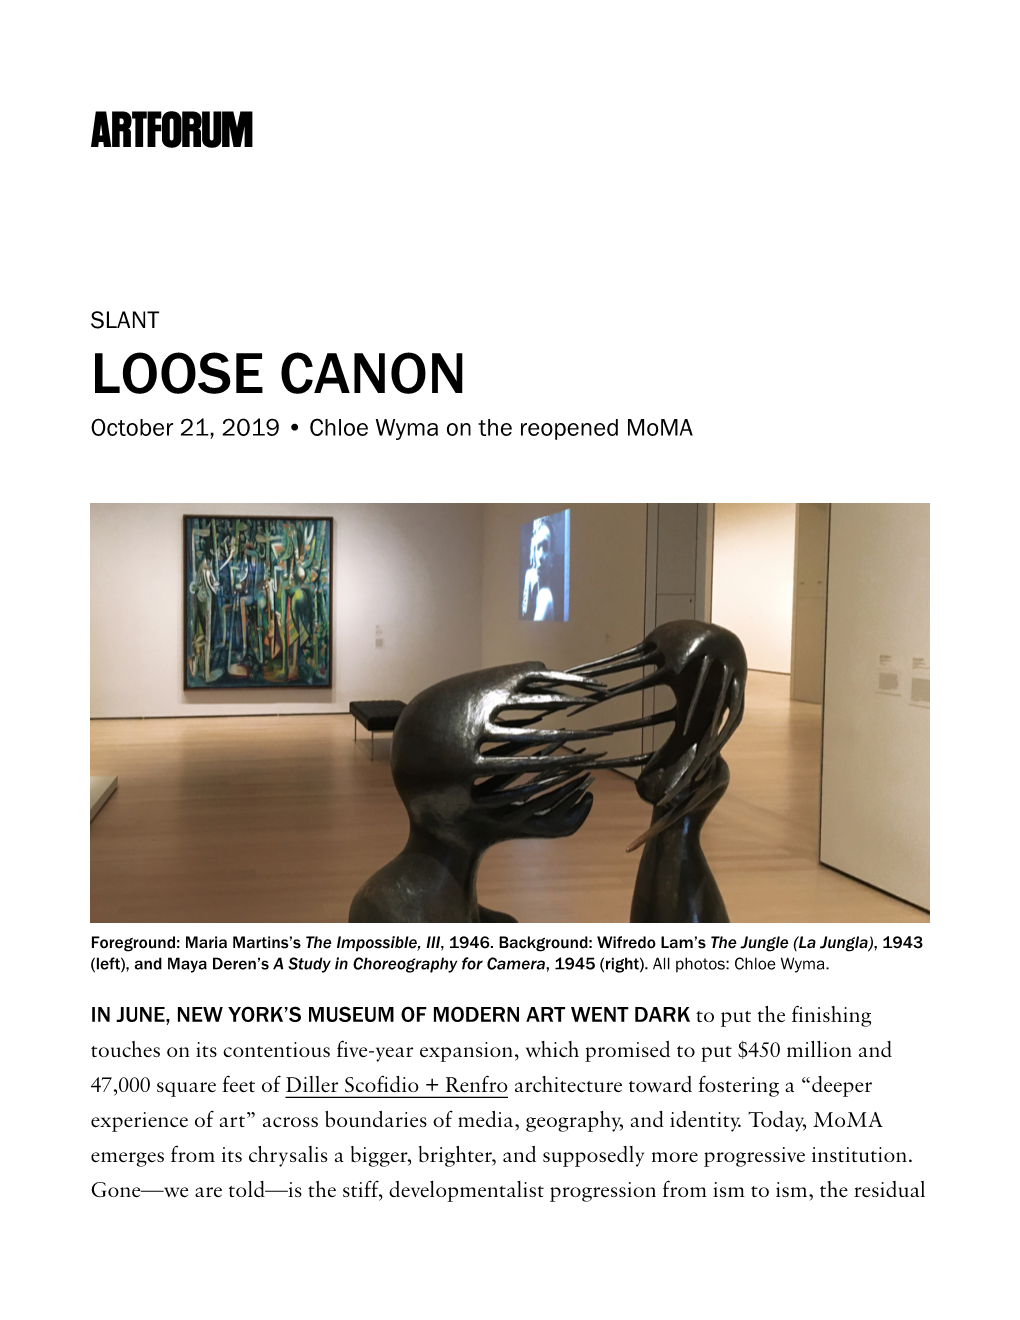 LOOSE CANON October 21, 2019 • Chloe Wyma on the Reopened Moma